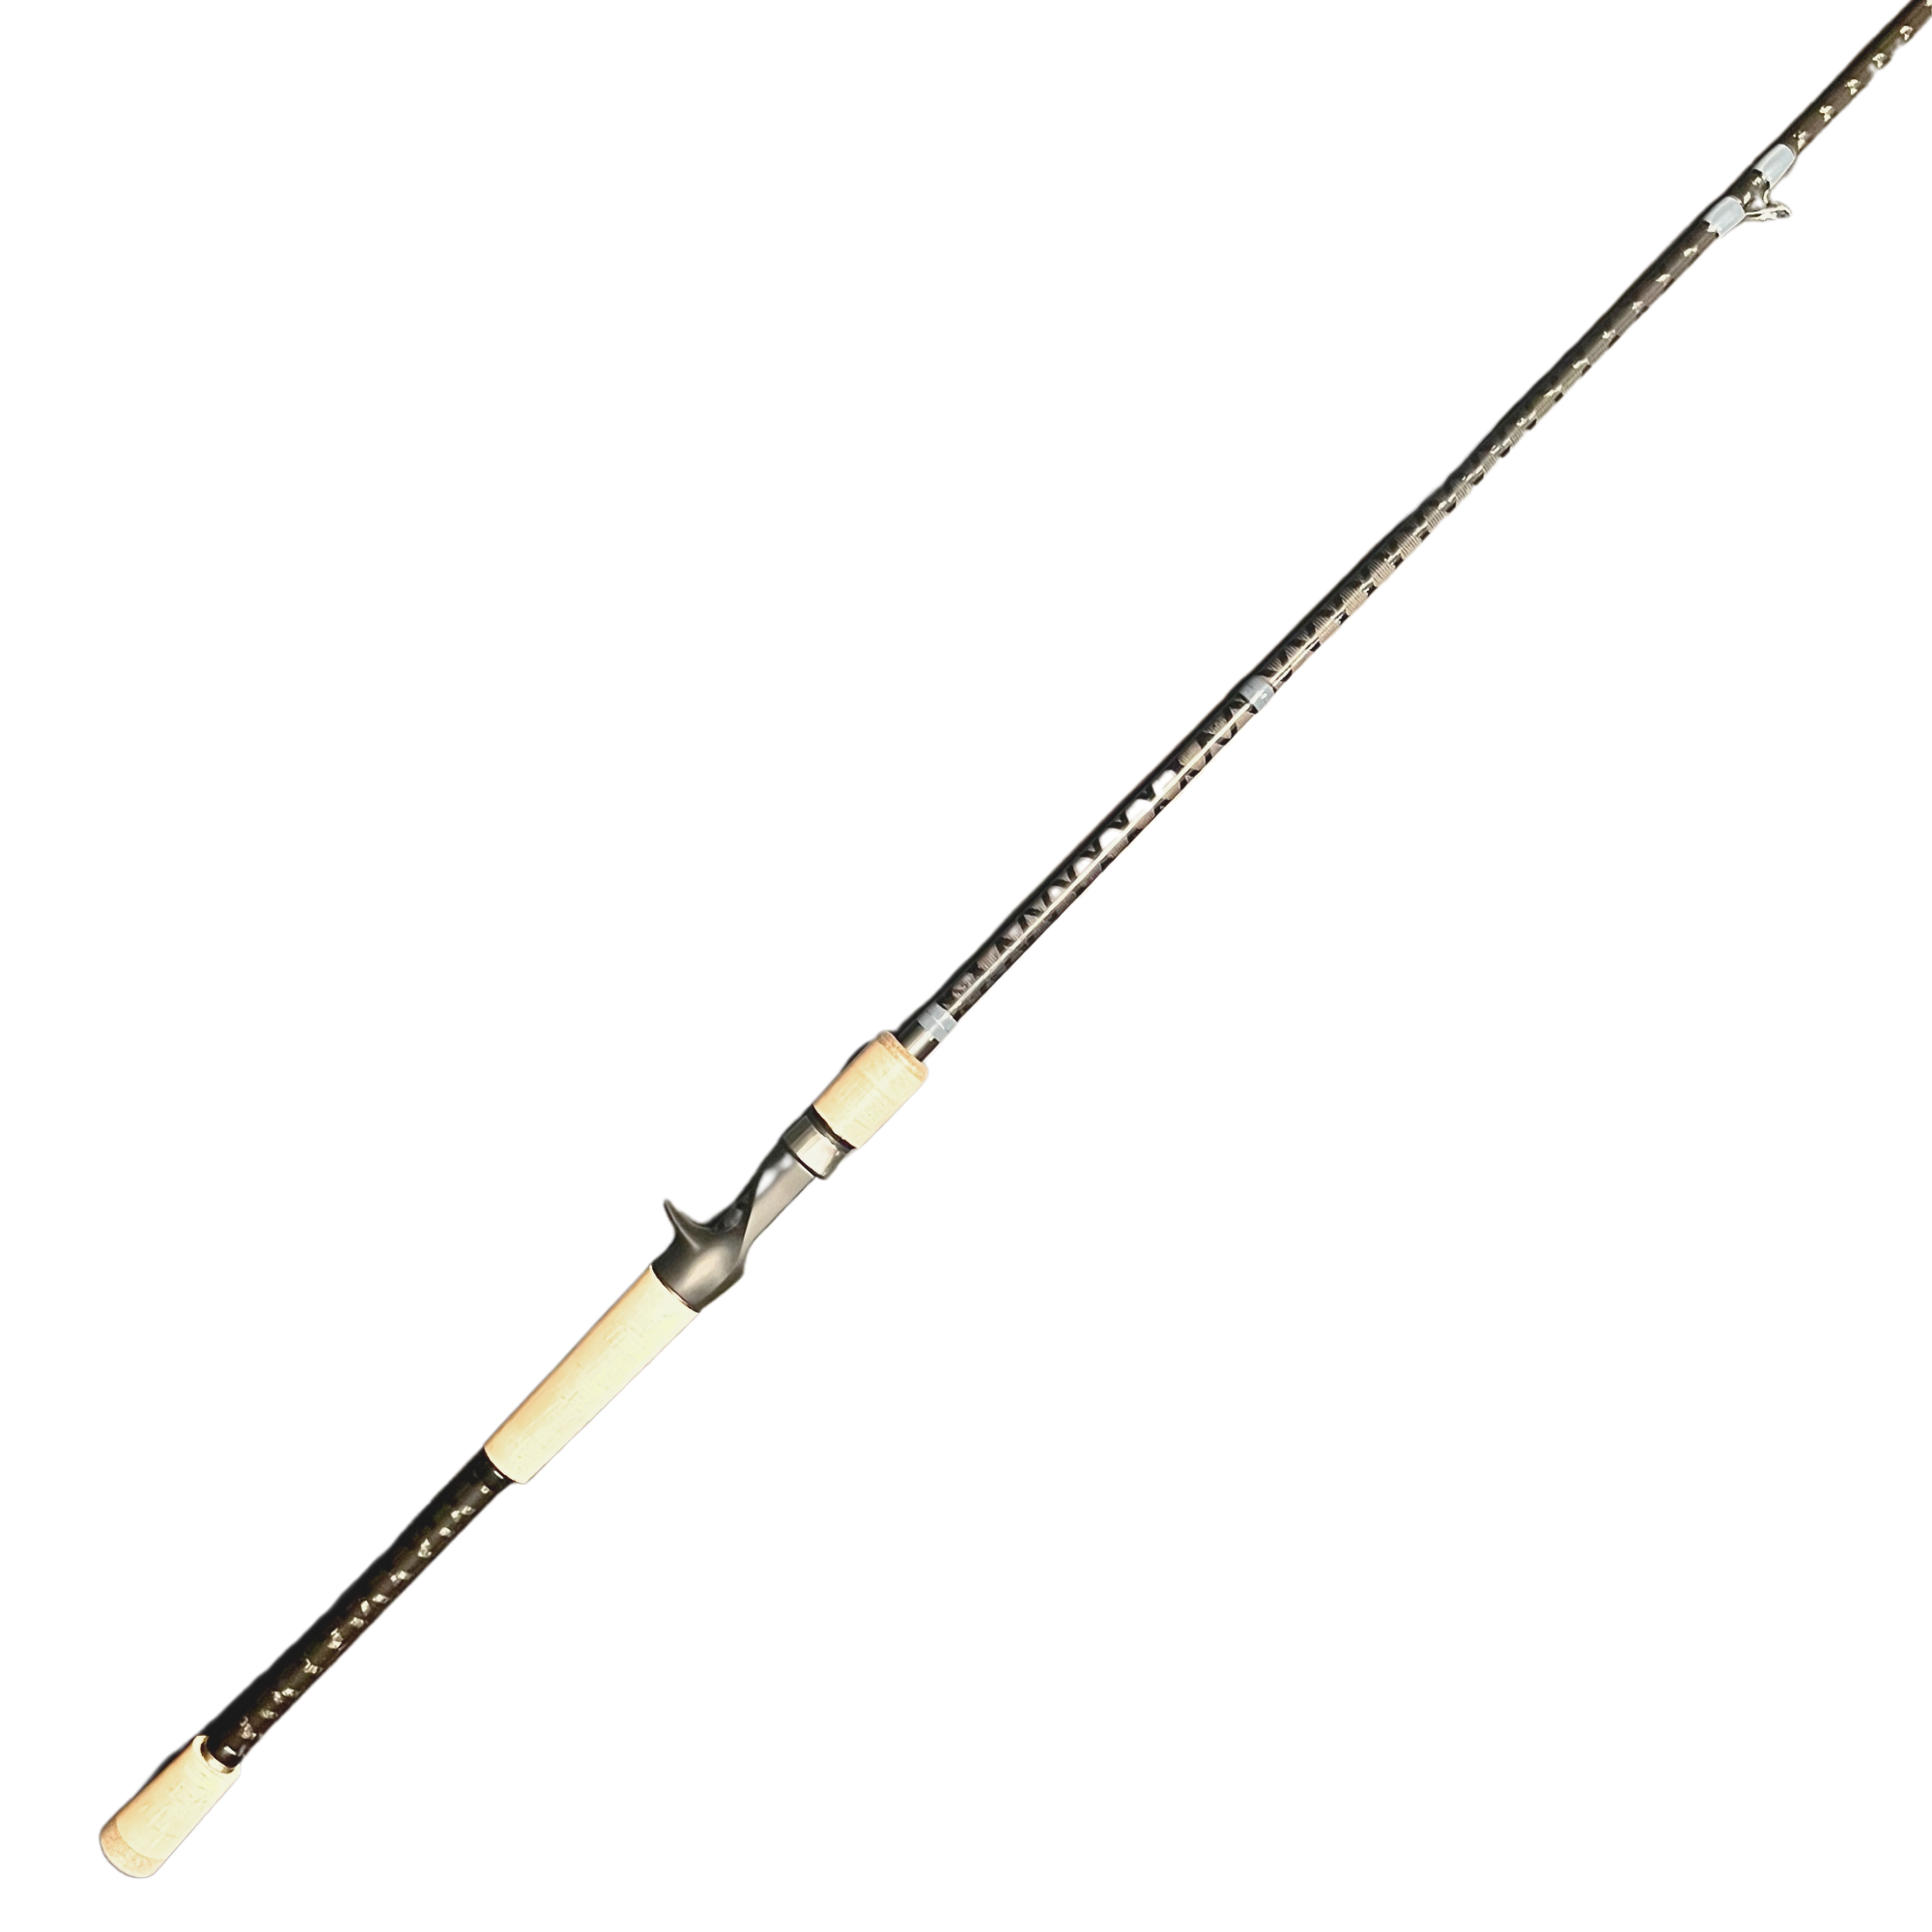 Cory Hasler Signature Series - Casting Rod